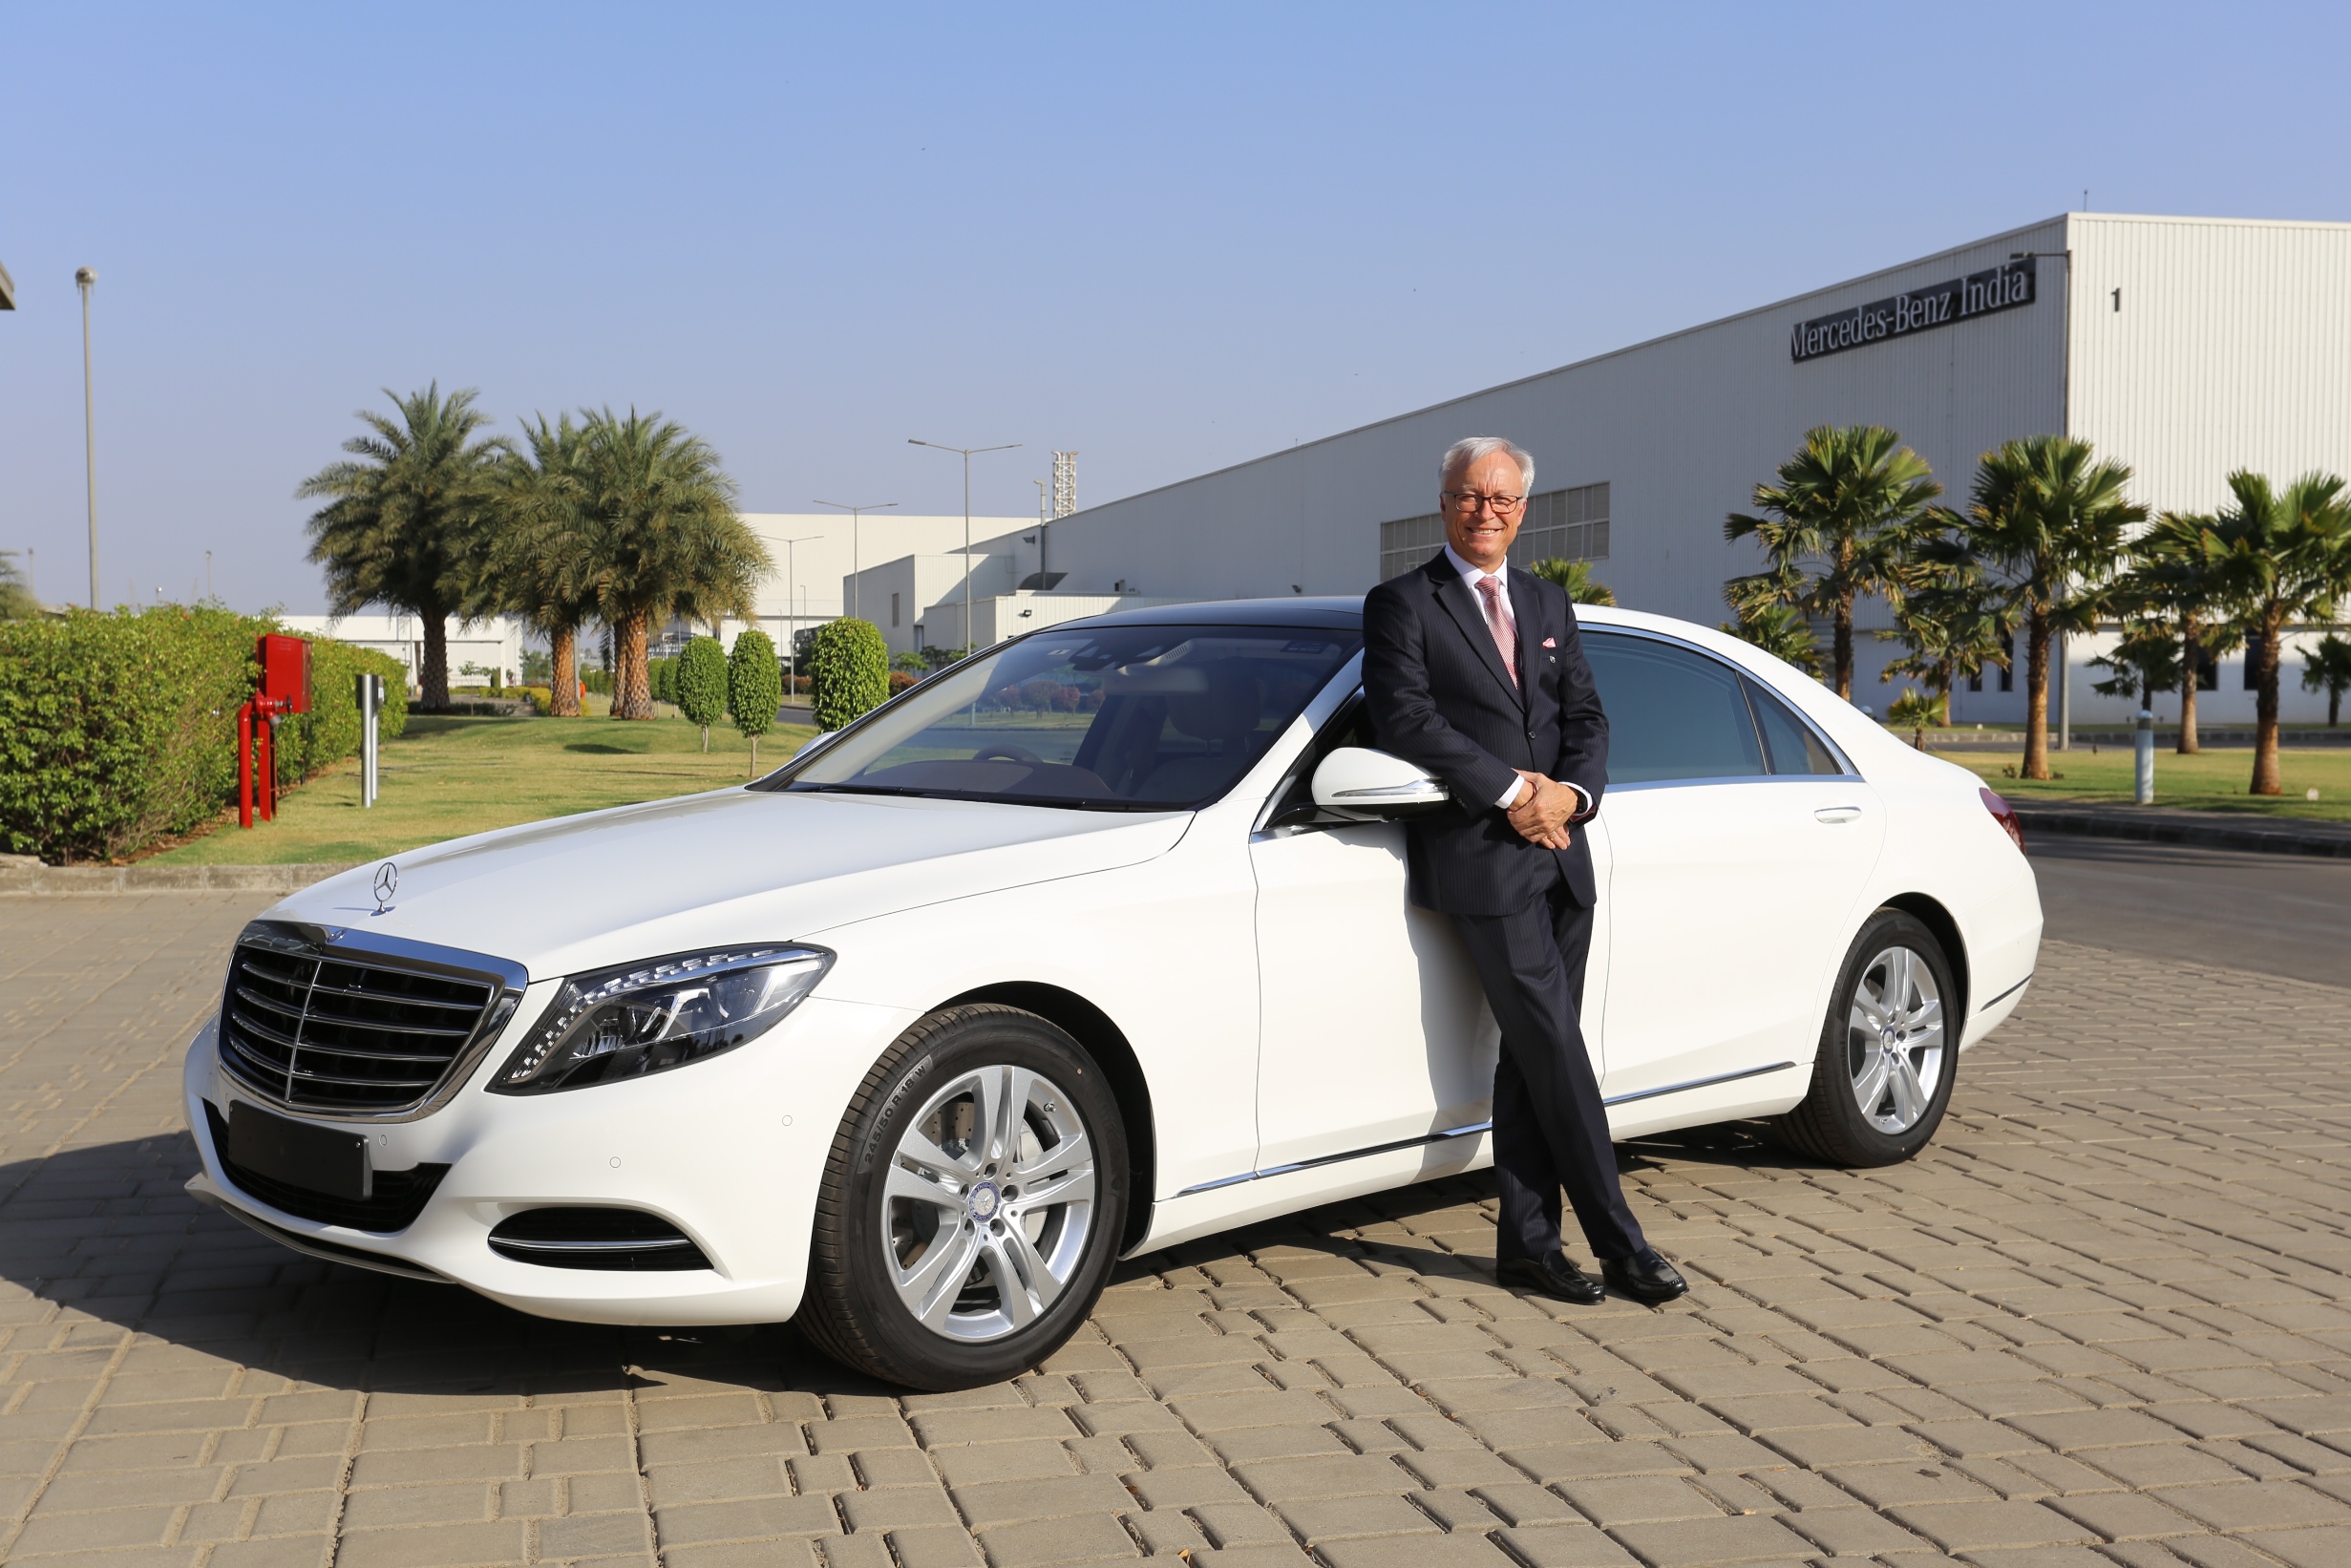 Mercedes adds special edition S-class to its line-up